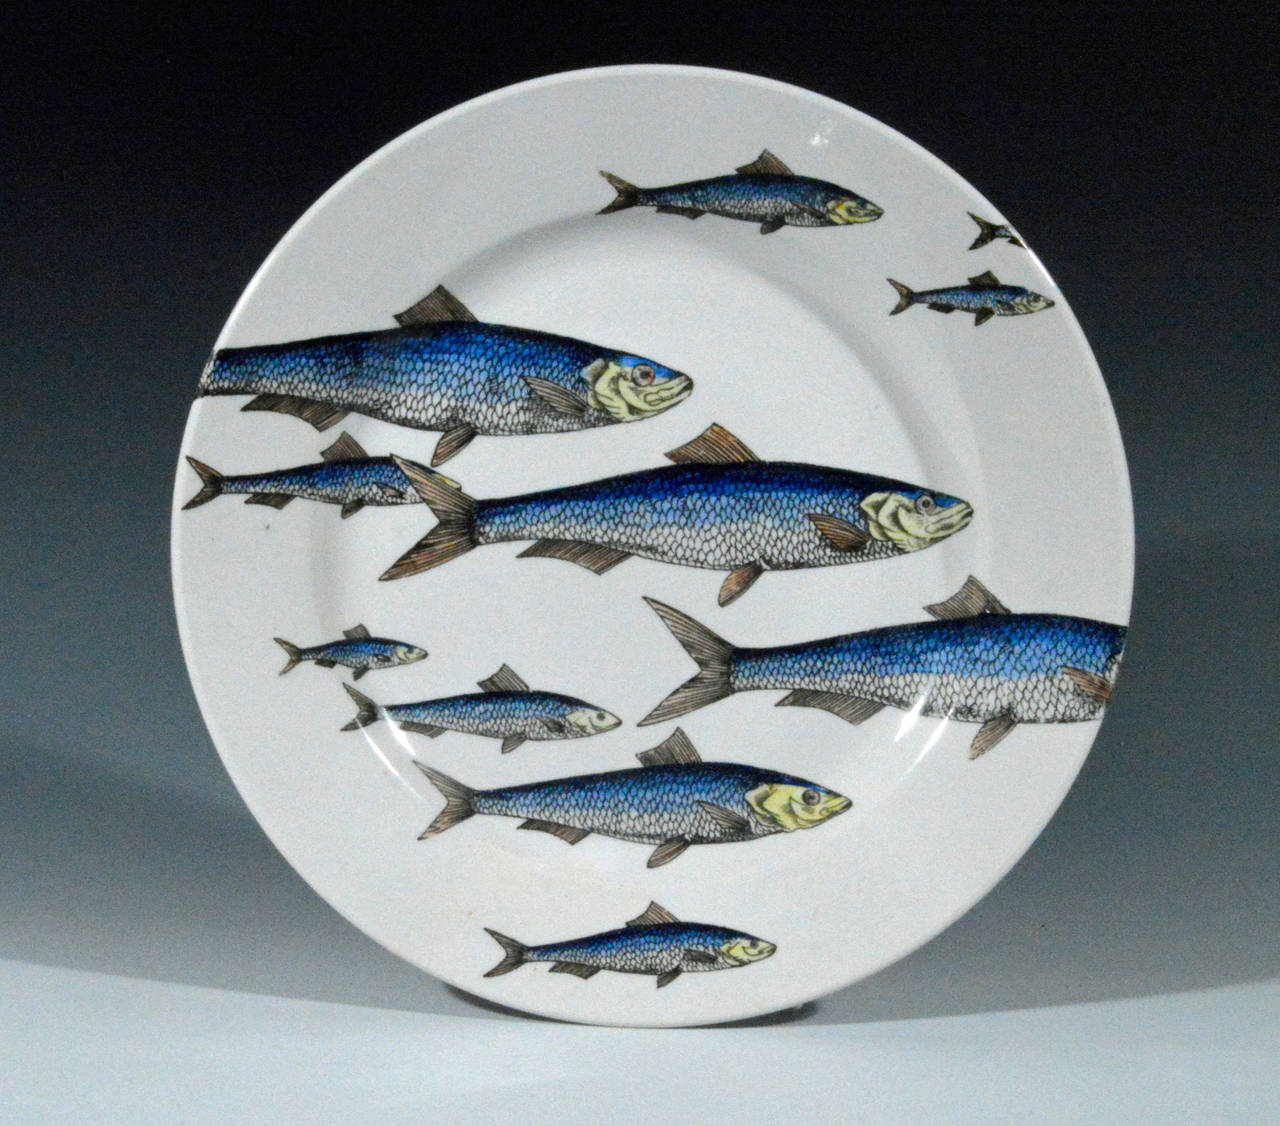 Passata de pesce (Passage of Fish).

The earthenware pottery plates depict three different schools of fish swimming together across the plate. This pattern was issued over a period of time but this particular set is one of the earliest made.